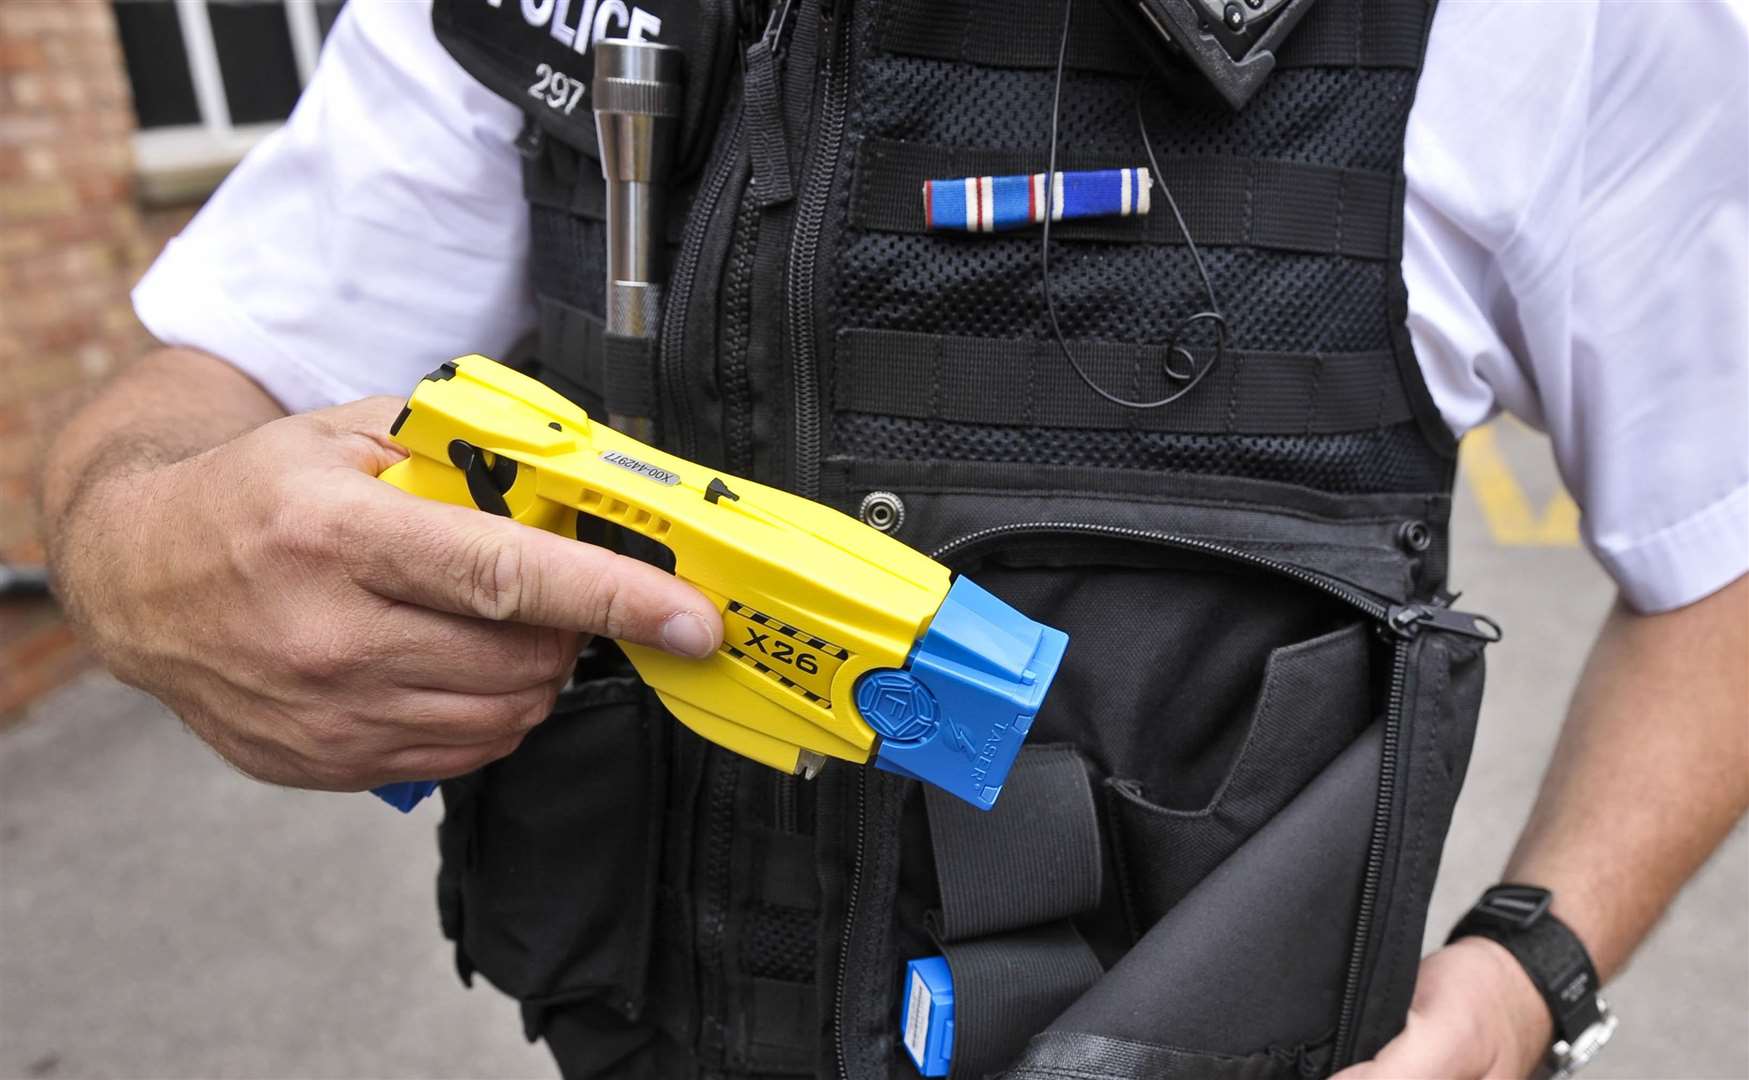 Soon every officer will have a taser - if they want one